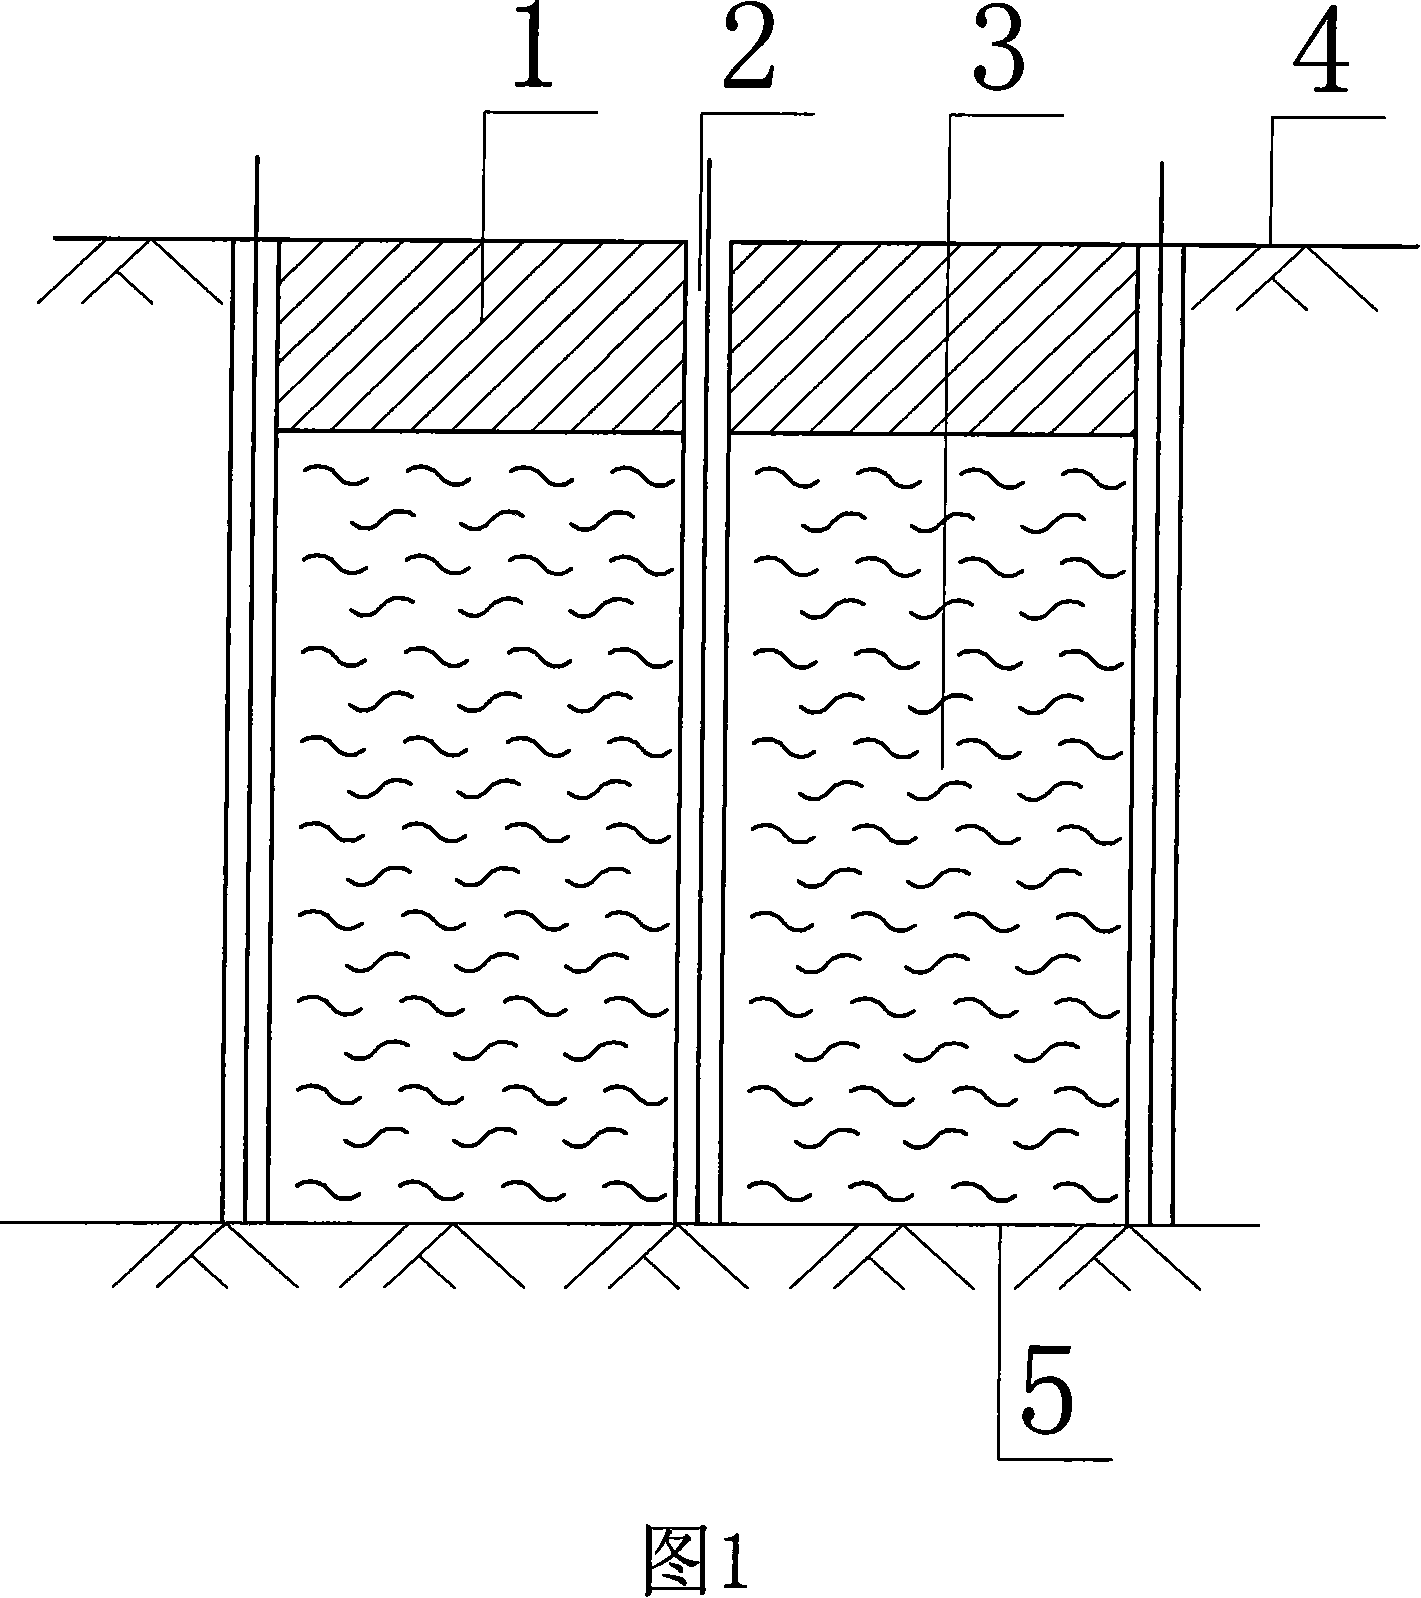 Large area soil dredging-filling ground treatment method and water percolation pipe